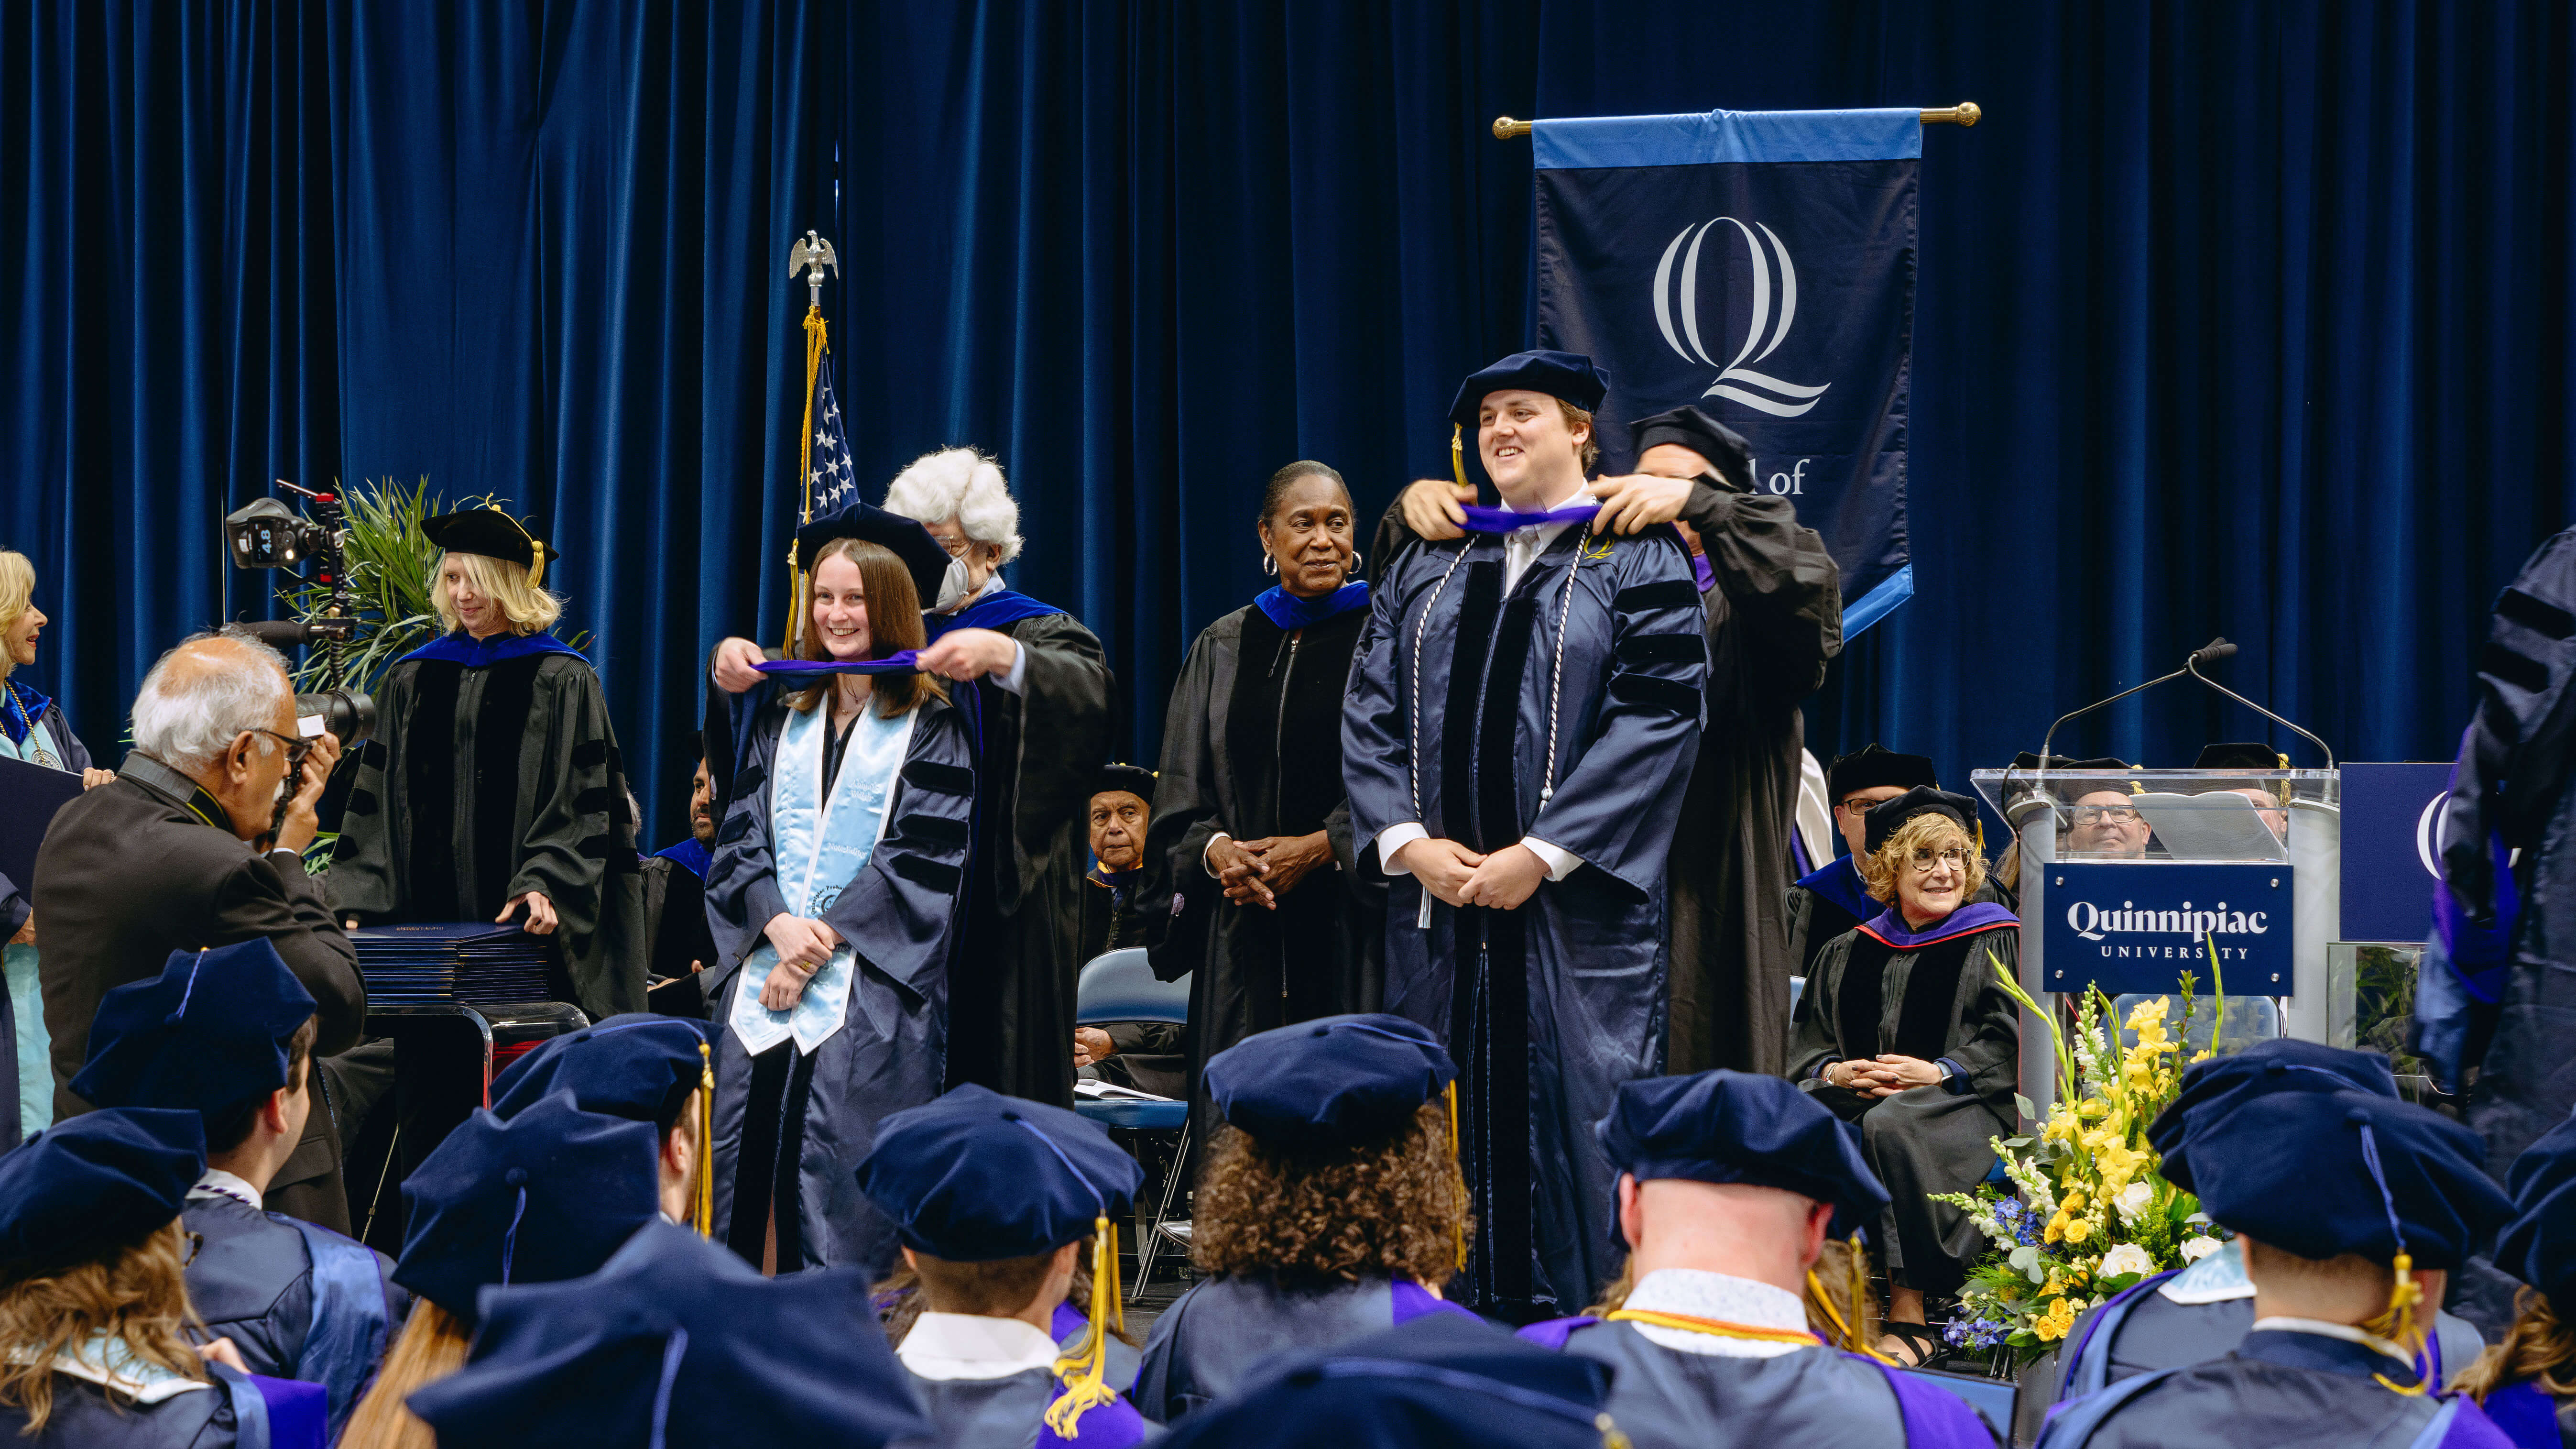 School of Law graduates standing on the stage at commencement